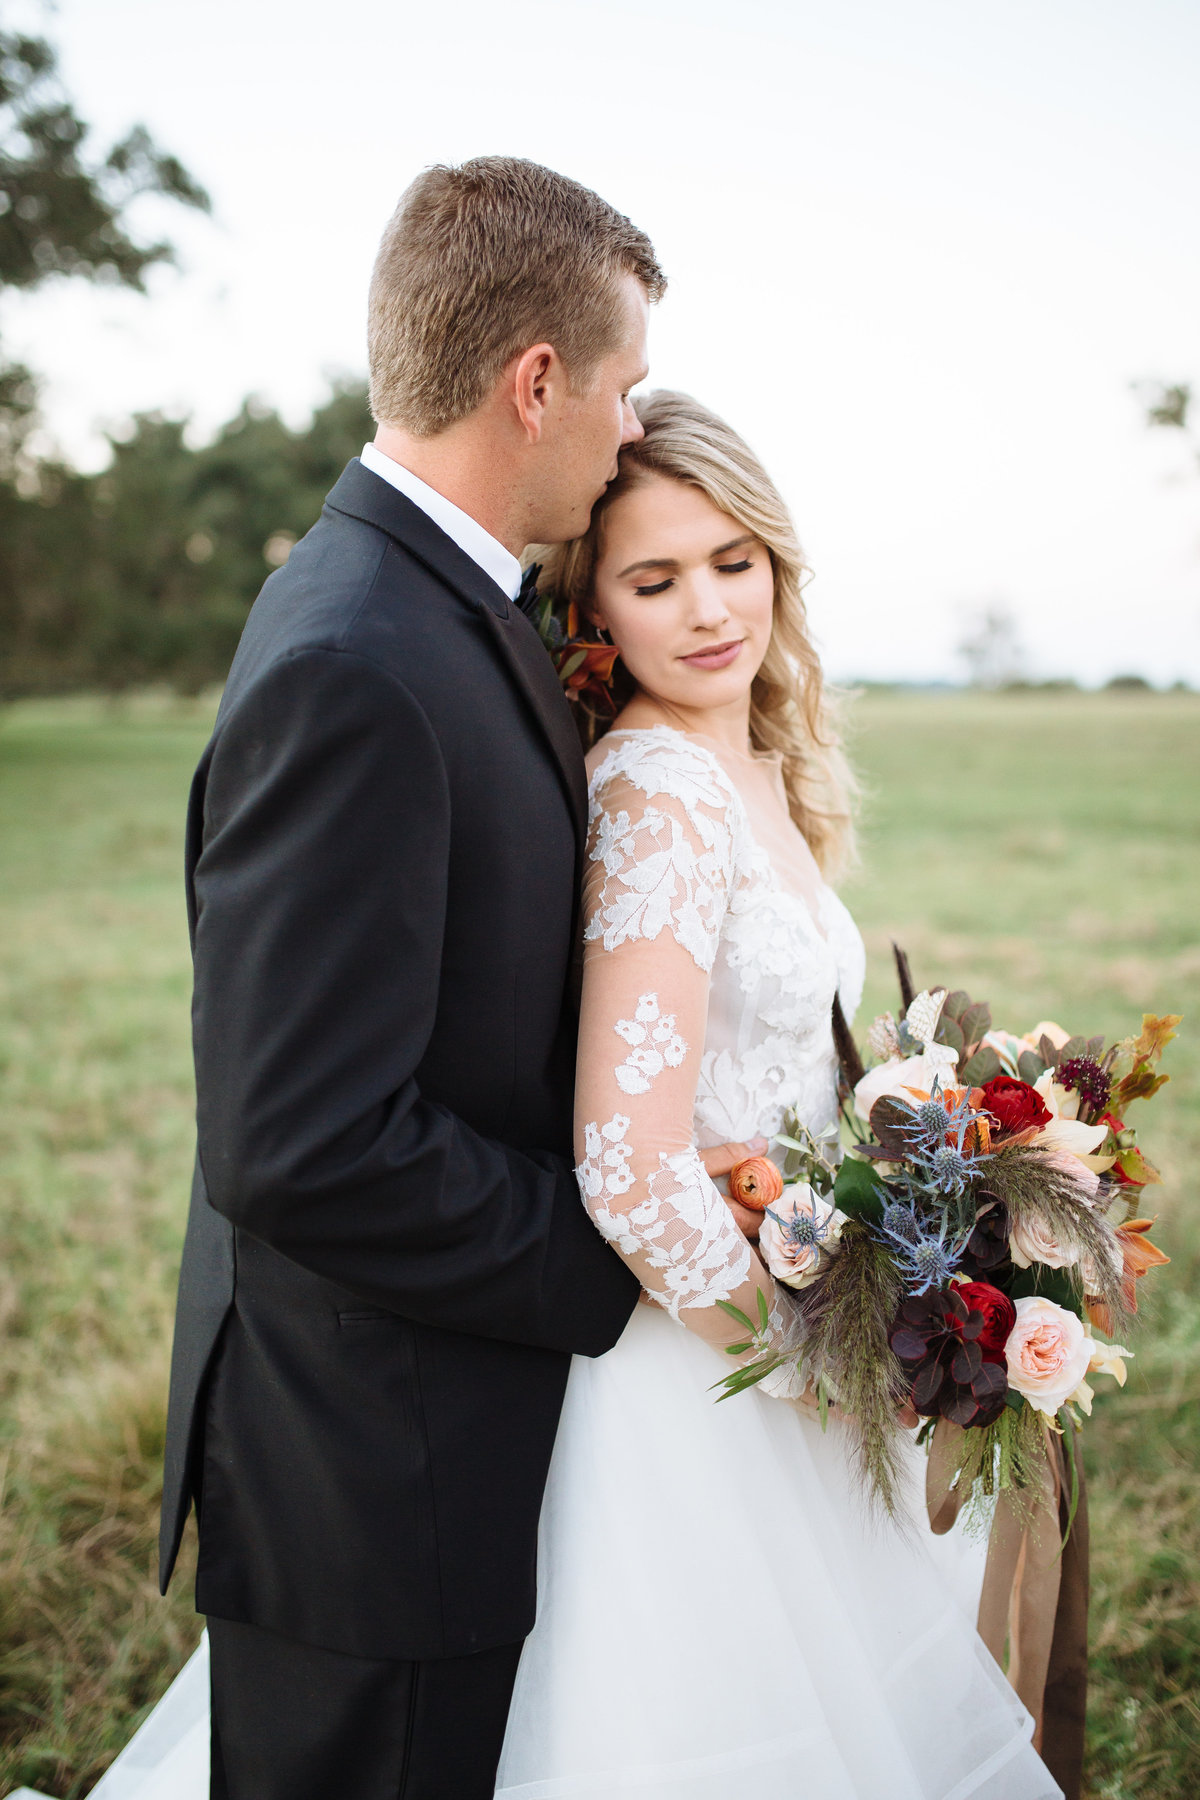 miss hayley paige wedding dress worn by a houston bride at a destination wedding photographed by smith housep hoto